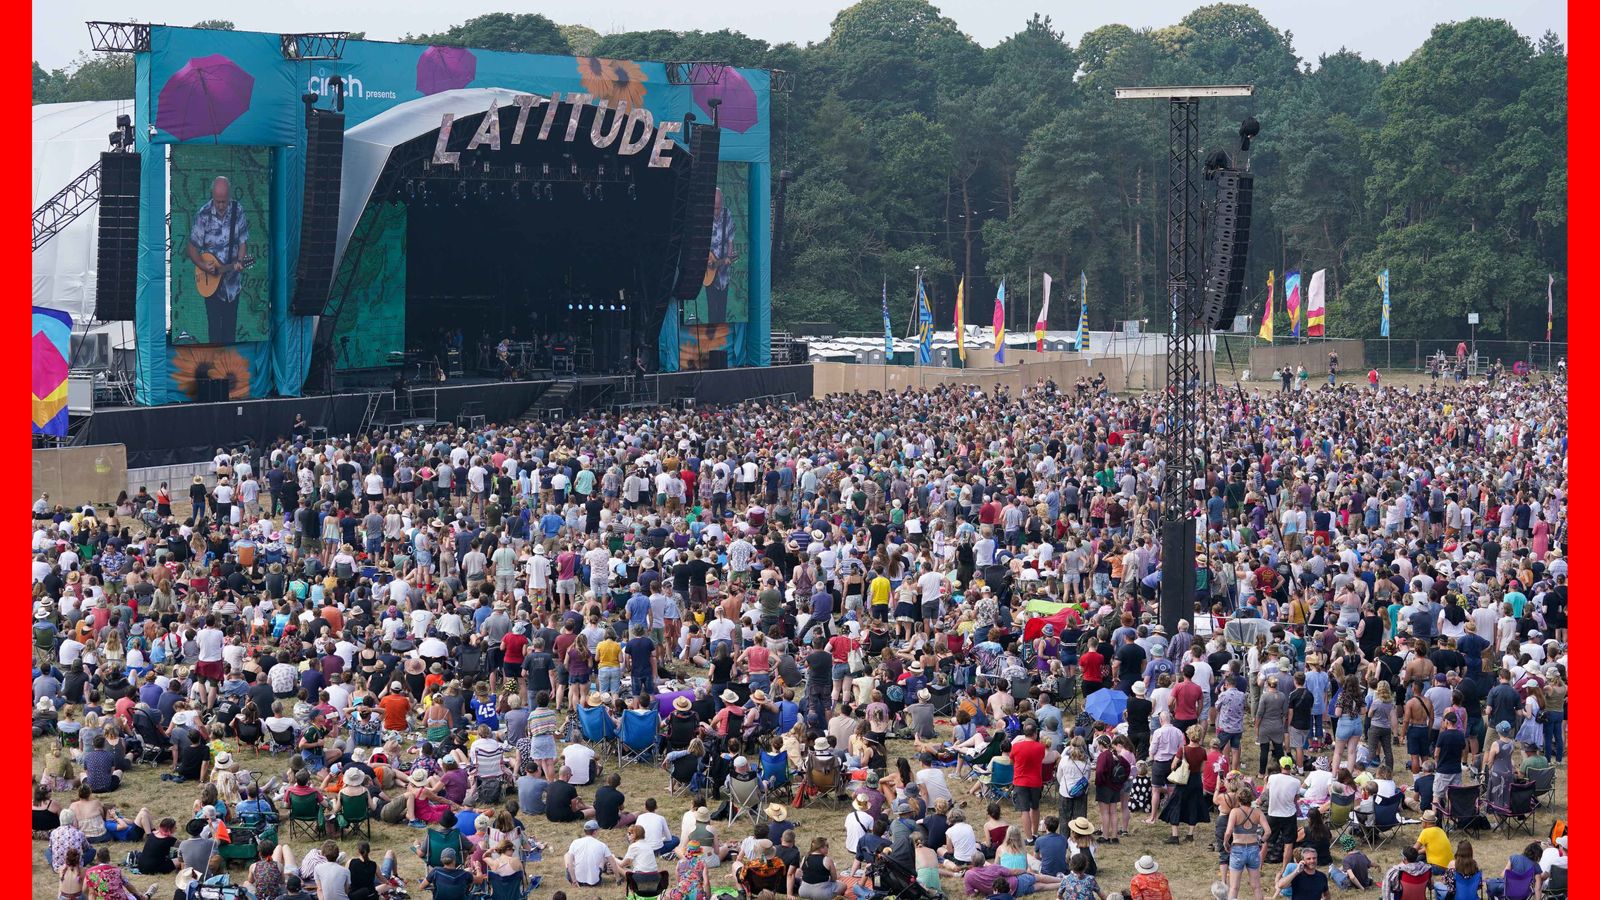 Latitude Festival cuts ties with sponsor Barclays after acts pull out